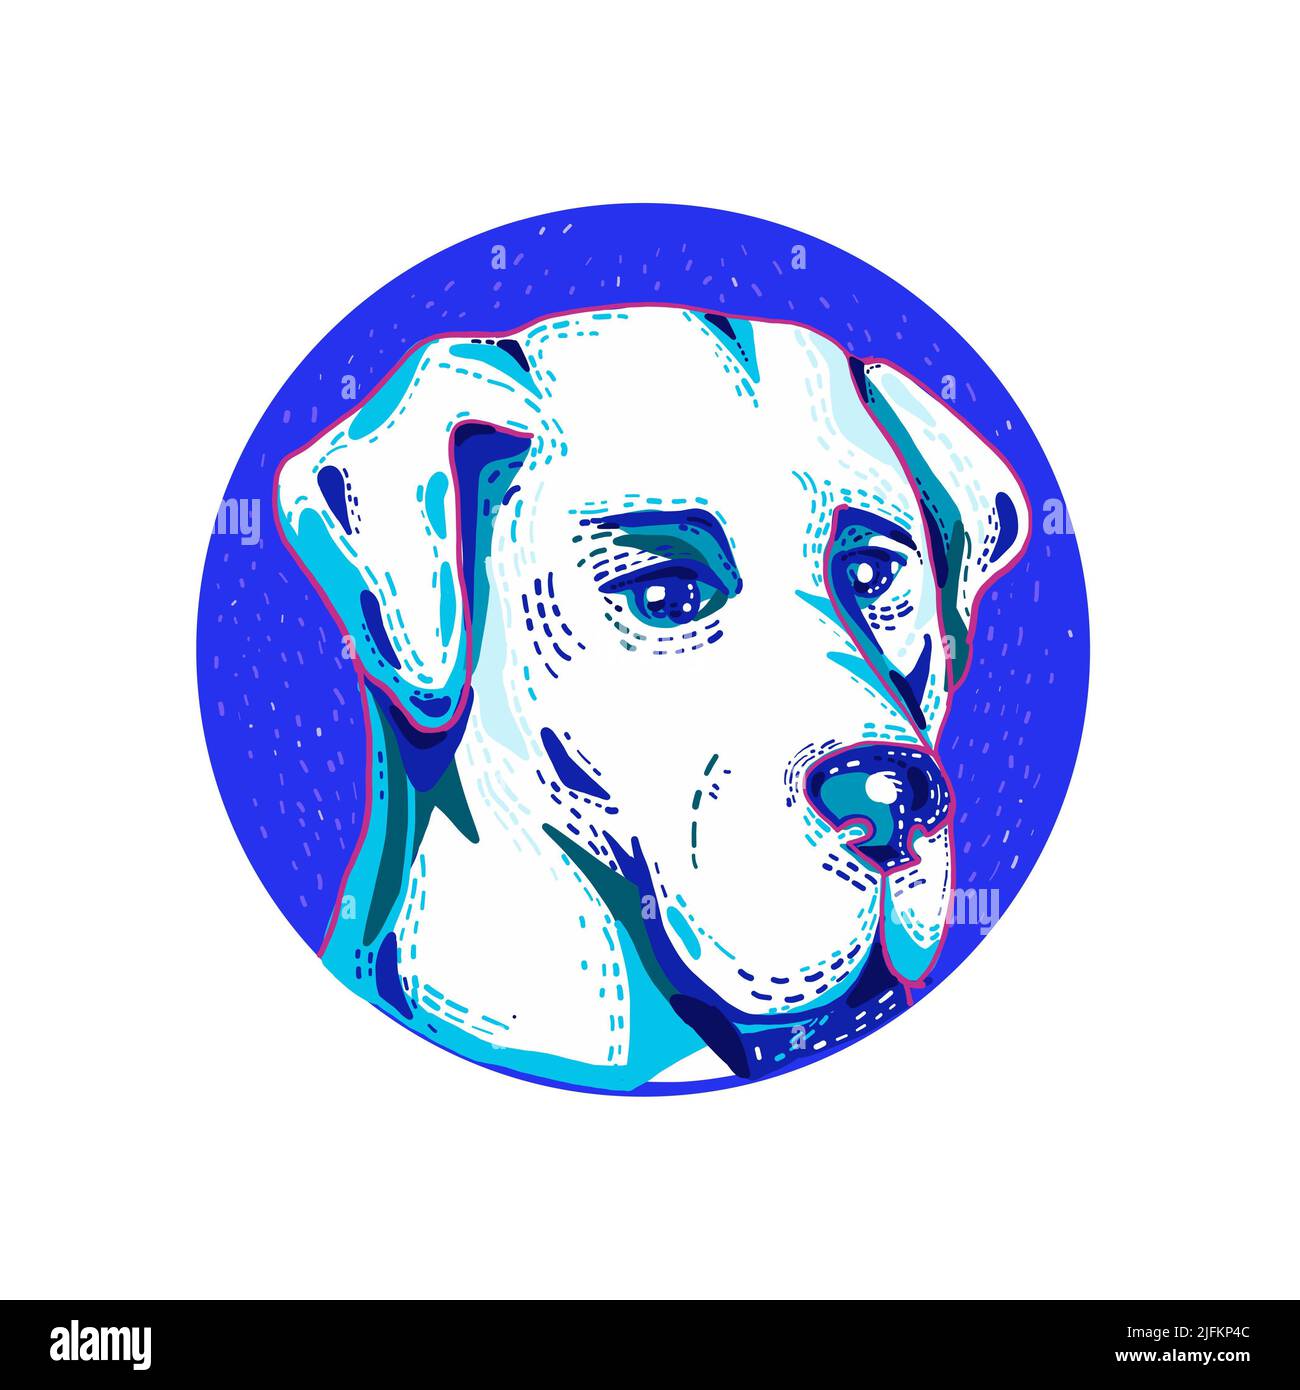 Doodle art illustration of head of a Labrador Retriever or Lab, a type of retriever-gun dog set inside circle done in retro style. Stock Photo